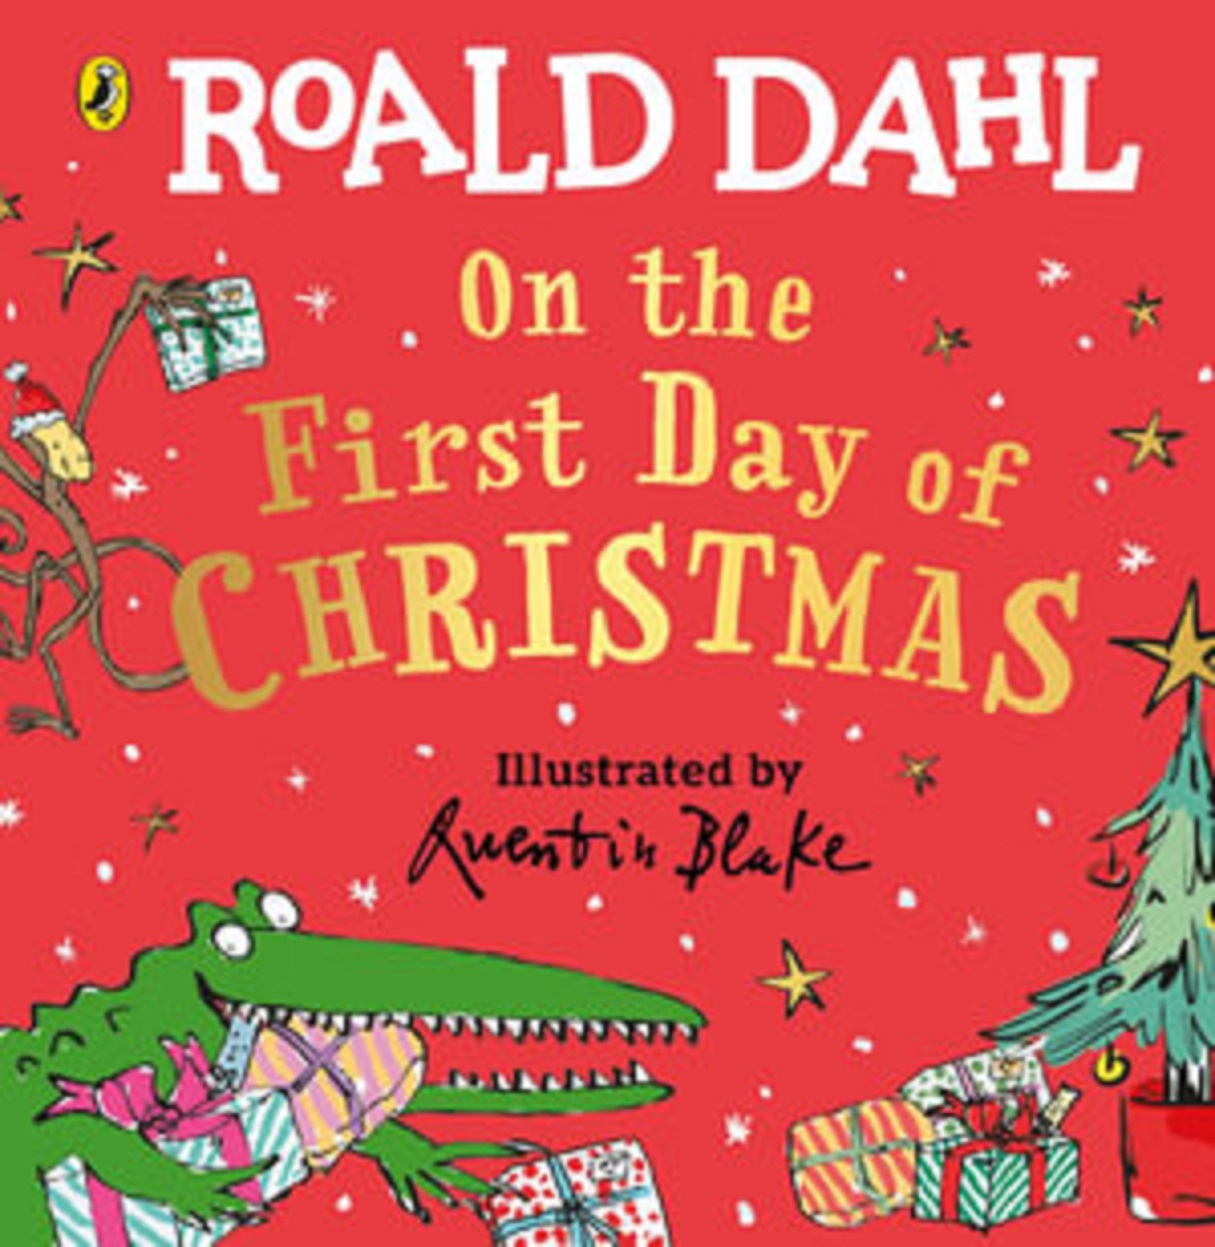 On the First Day of Christmas | Roald Dahl